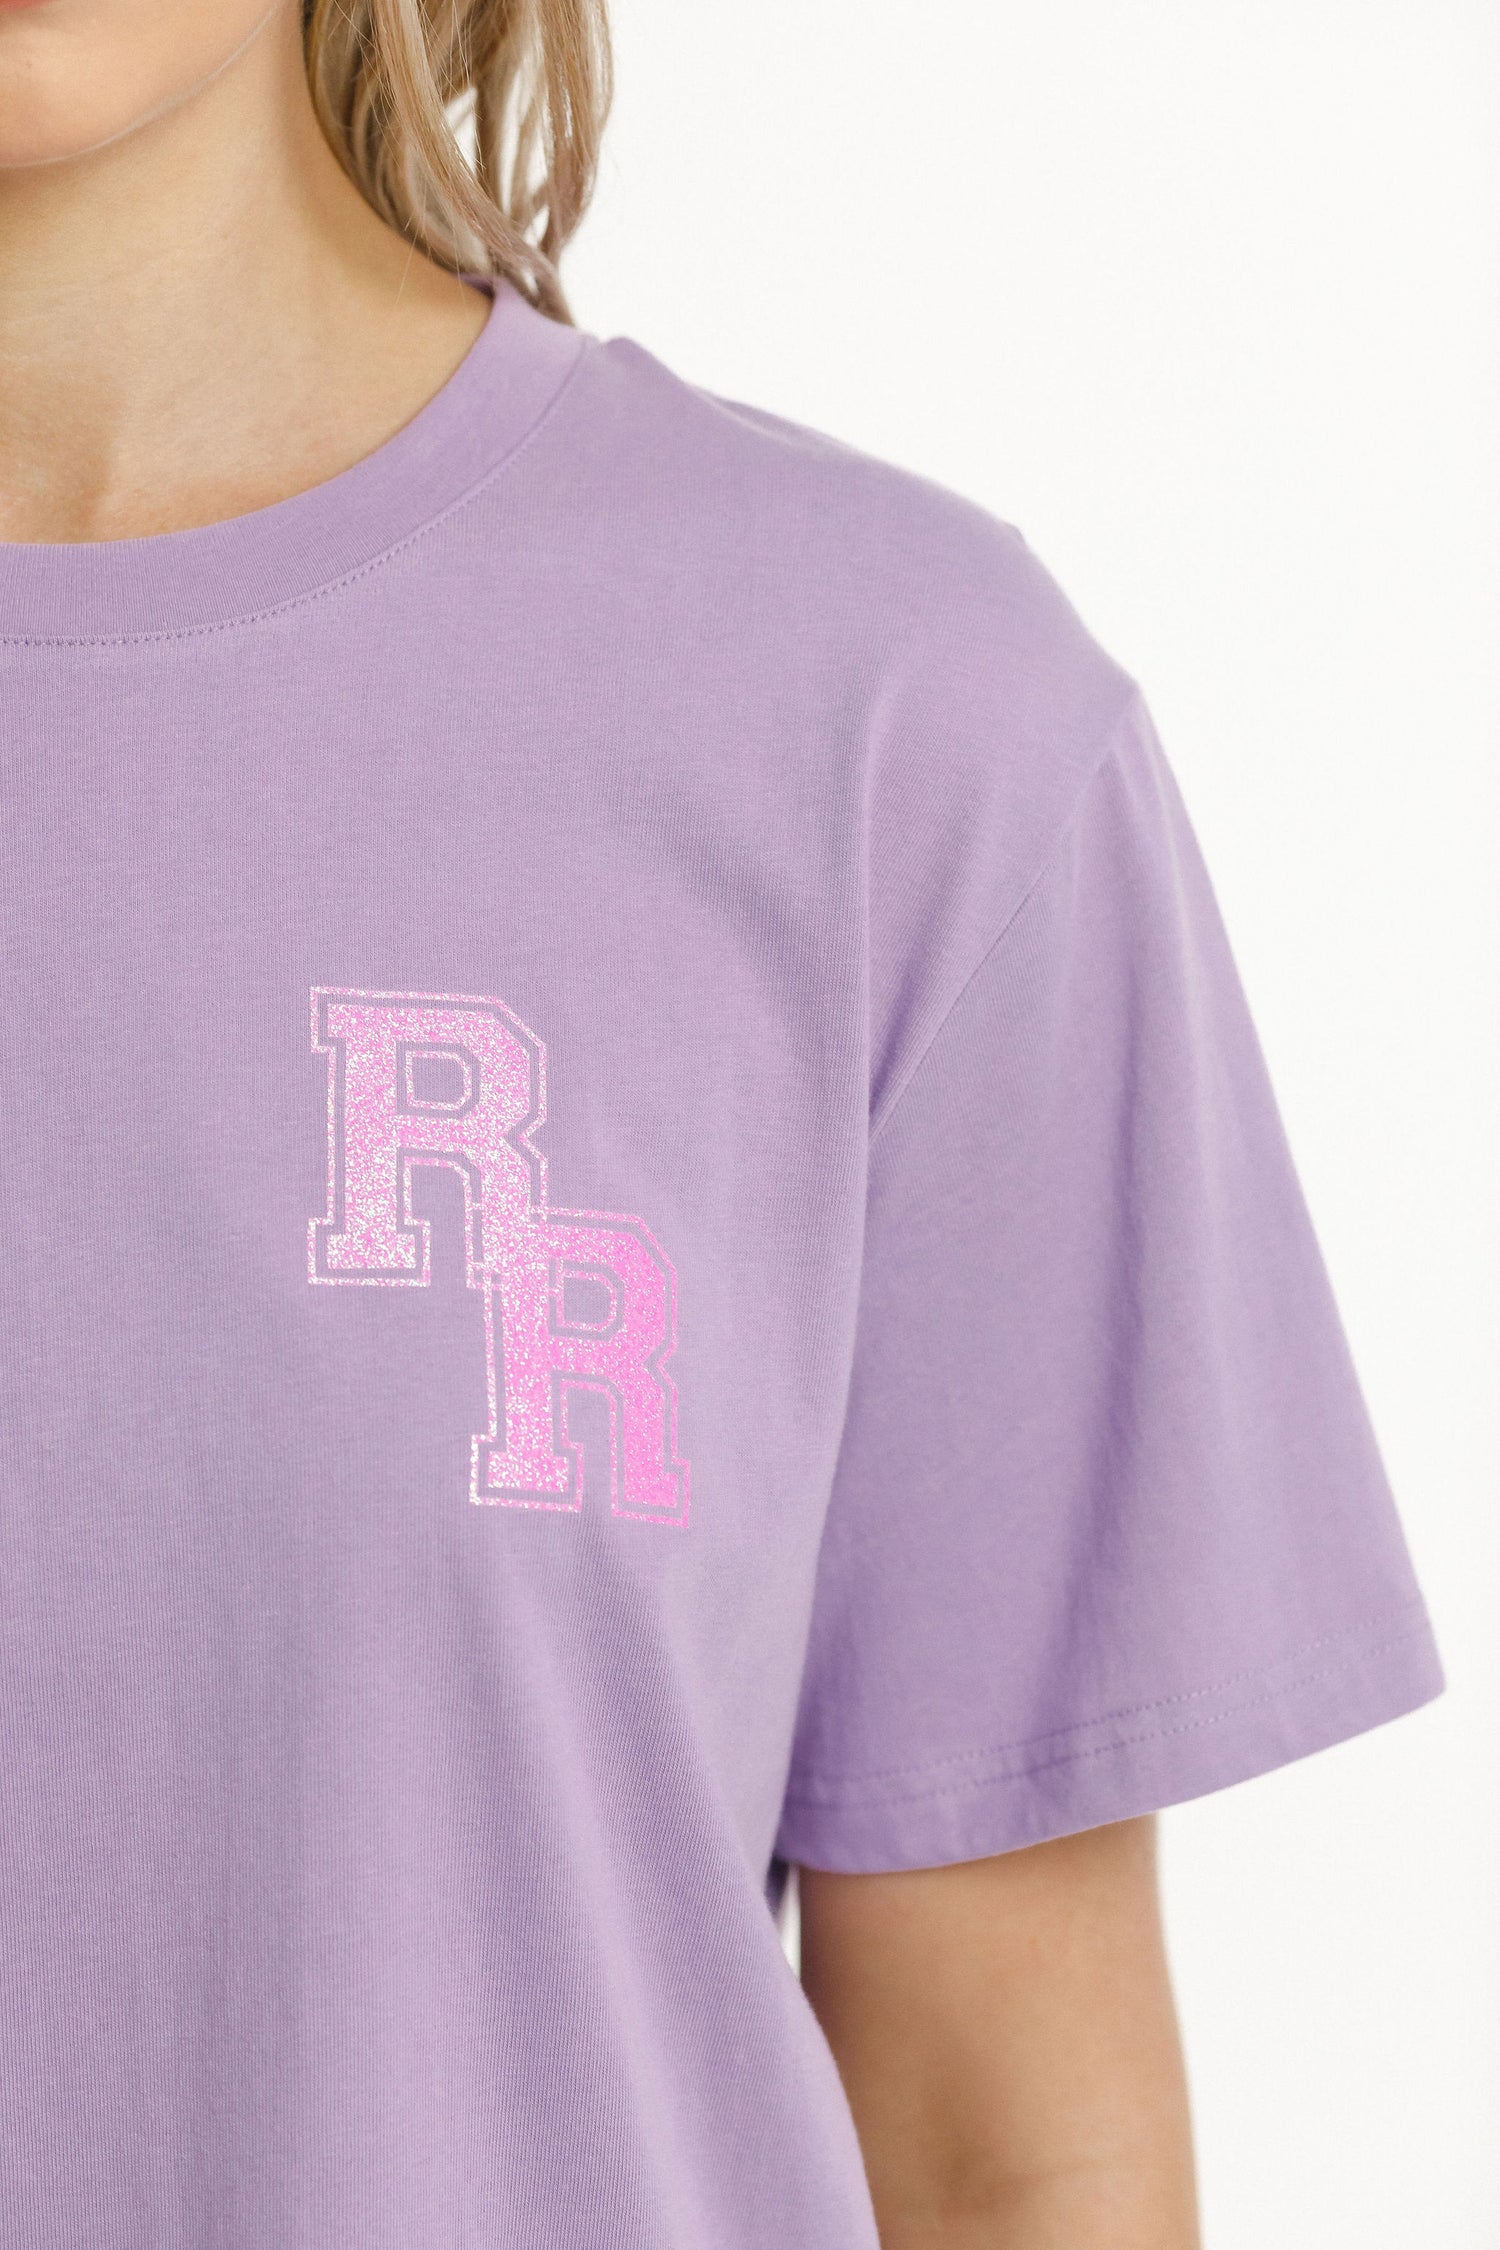 Topher Tee | Sale | Violet with Glitter RR Print